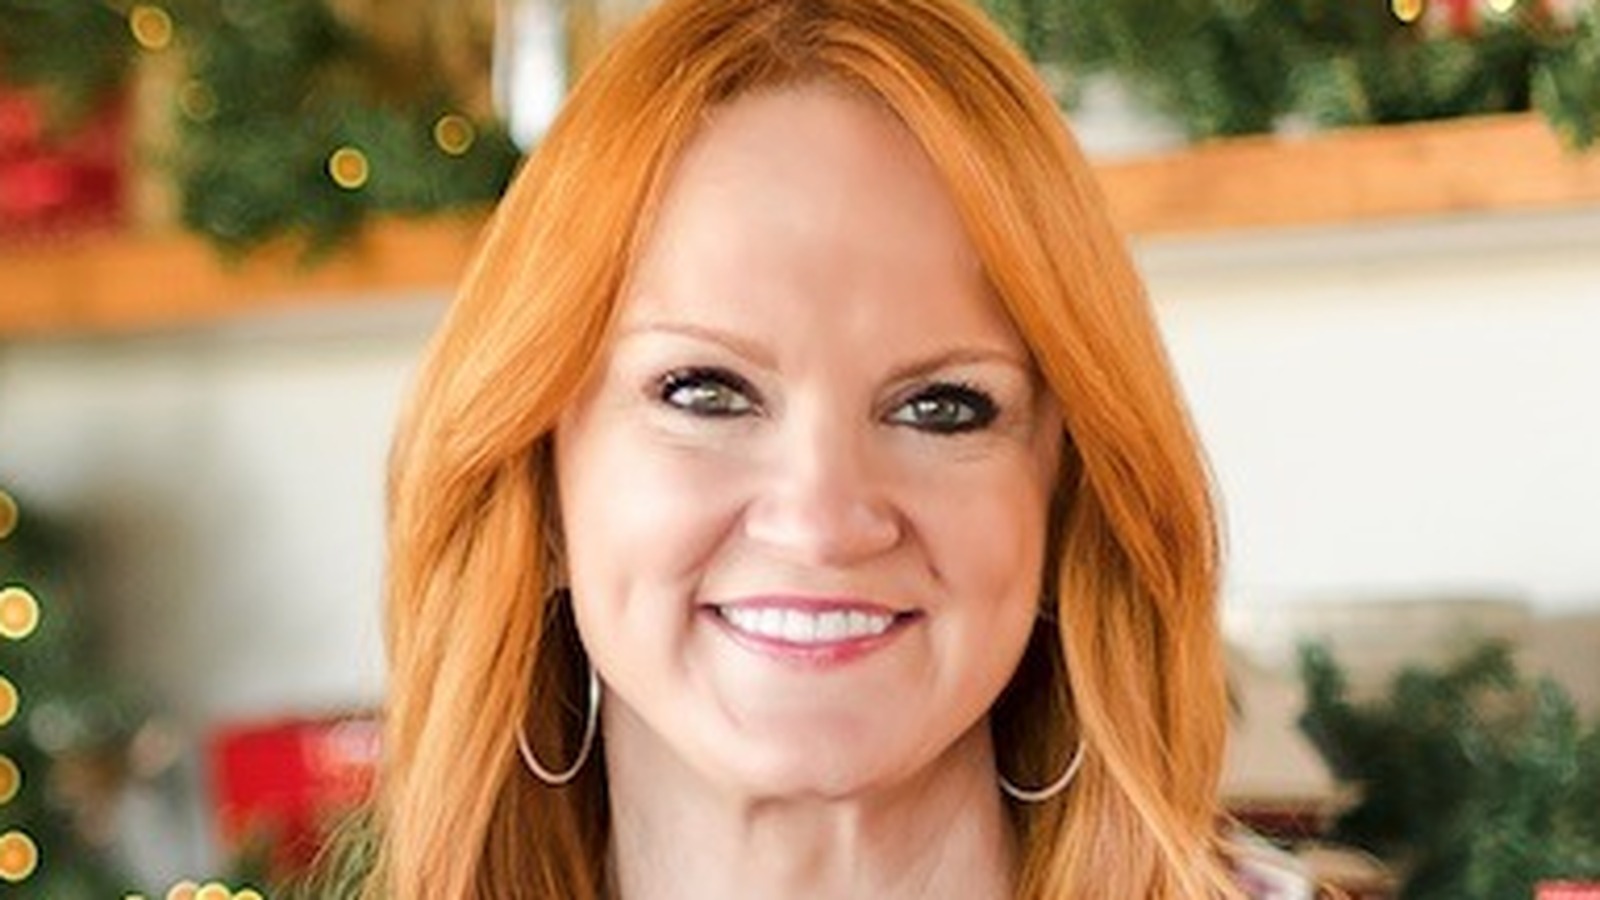 Ree Drummond Is Starring in the Food Network's First-Ever Holiday